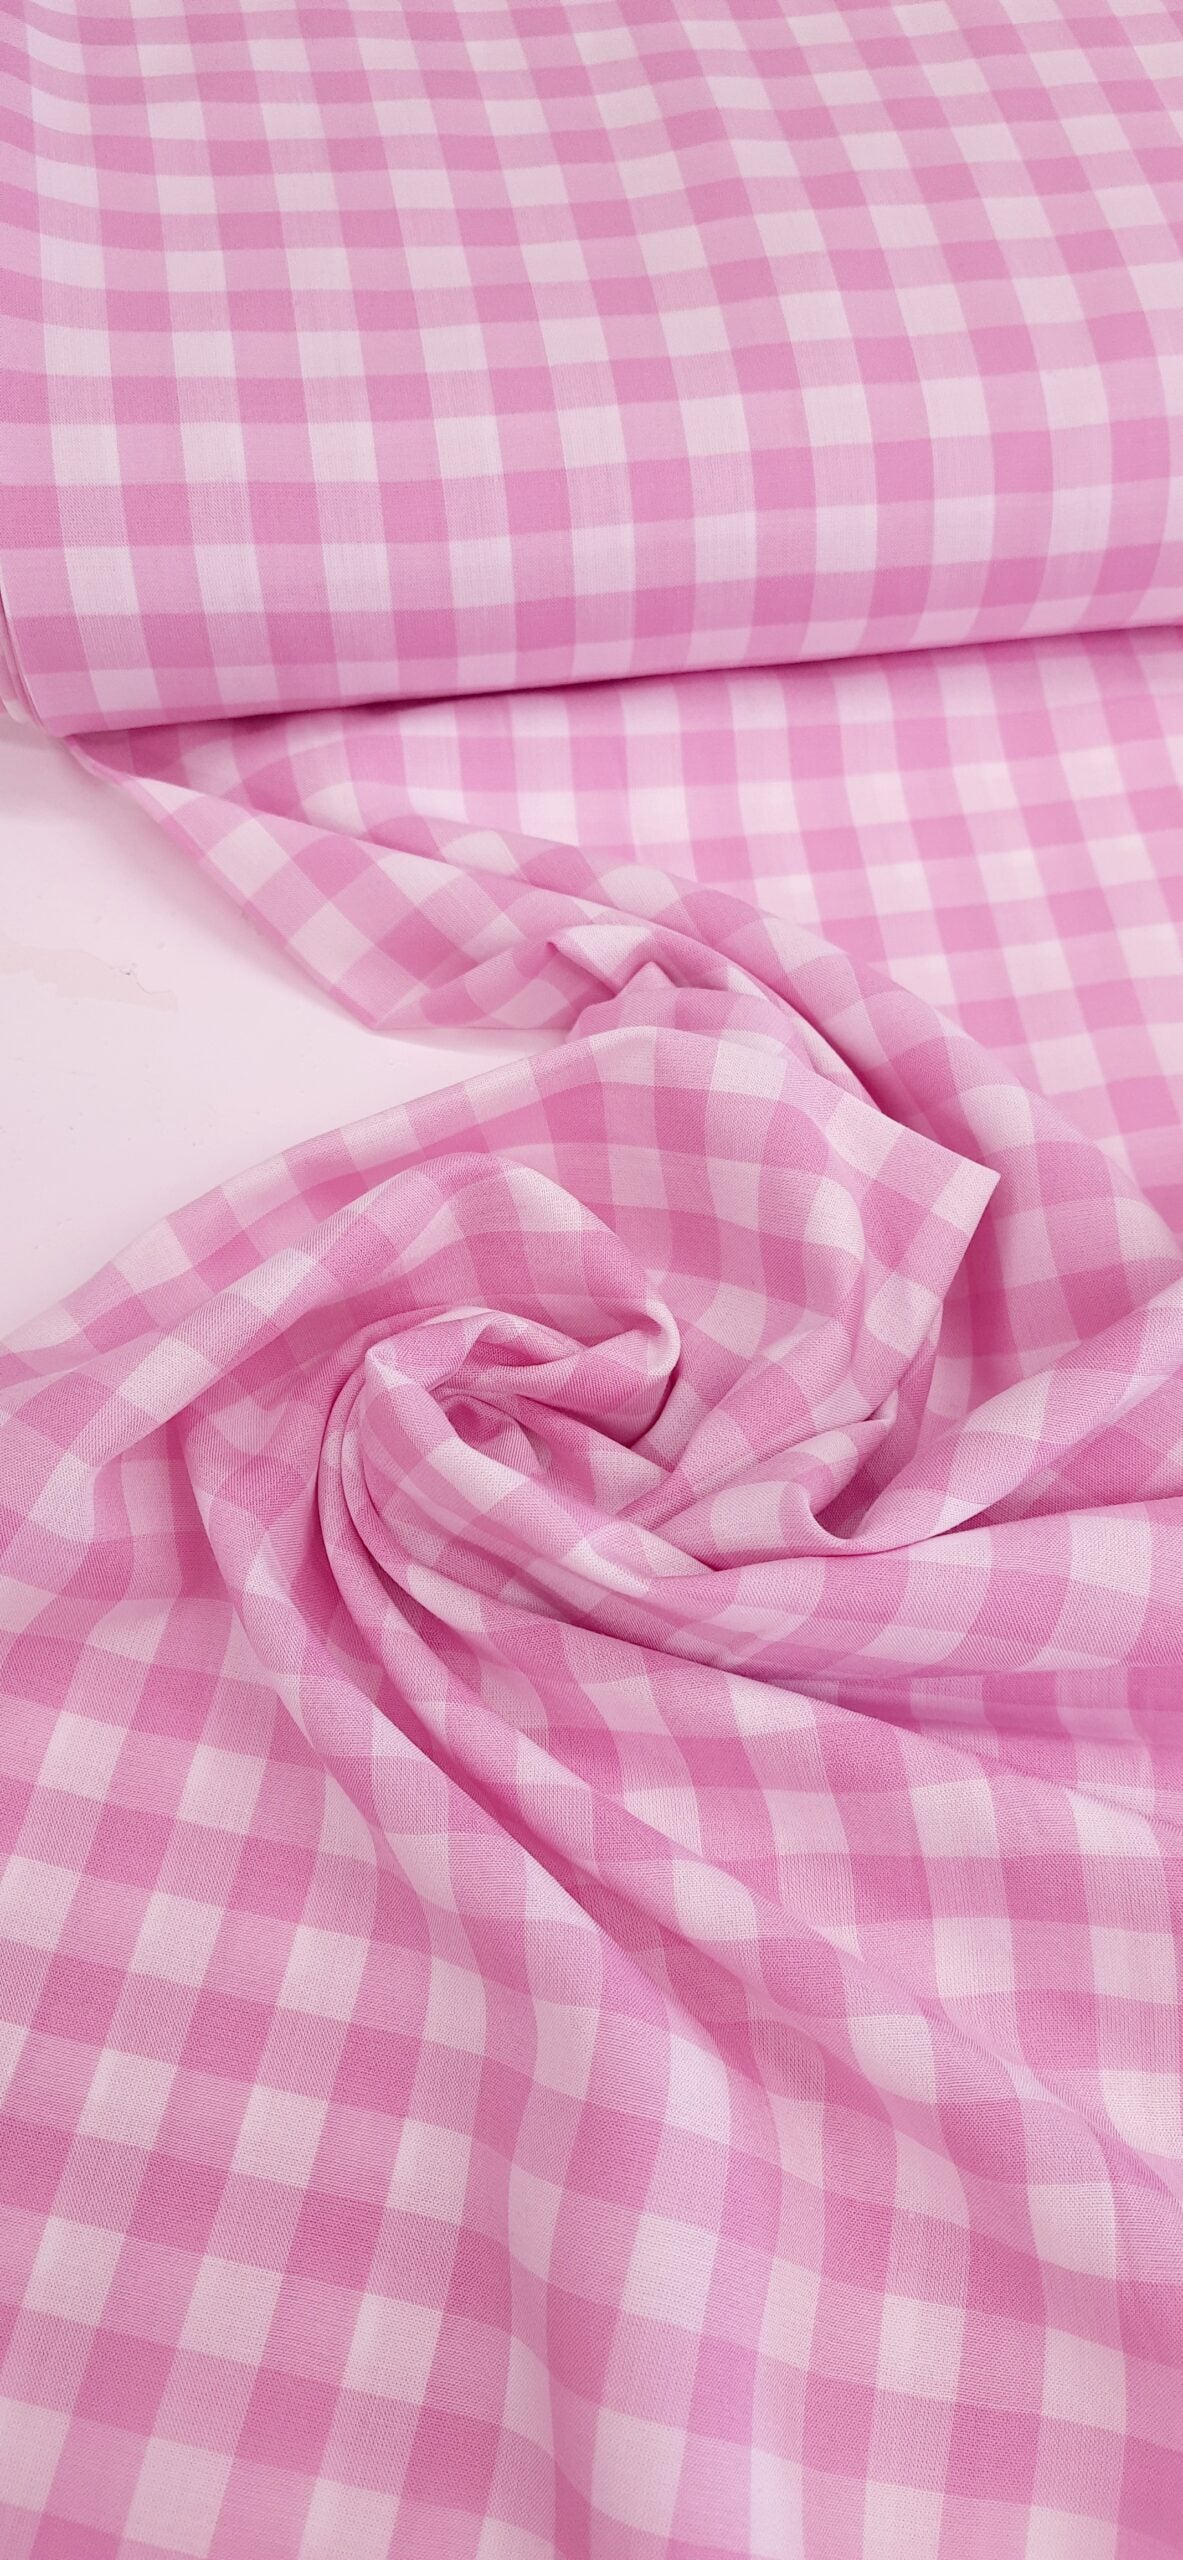 Candy Floss Gingham 100% Viscose – Remnant 95cm x Width